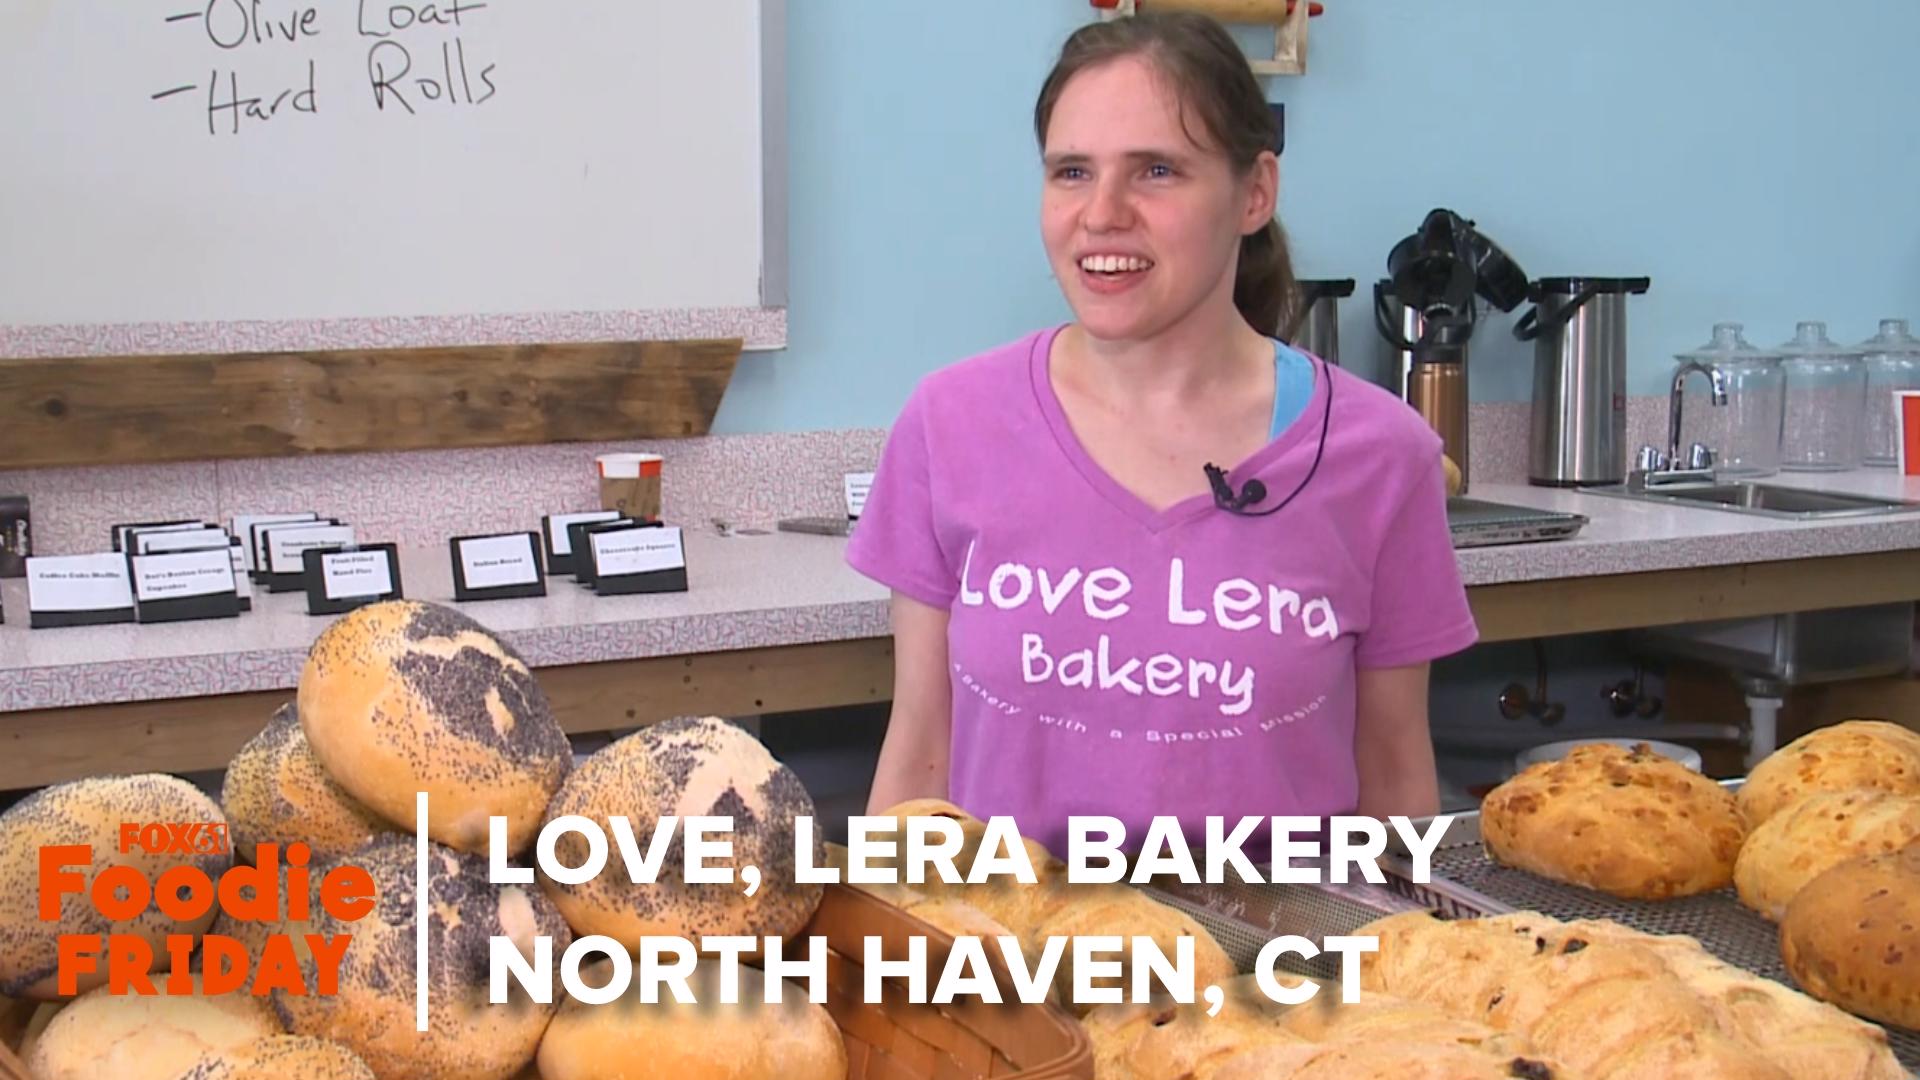 Love, Lera Bakery in North Haven serves up a lot more than just scones and cupcakes. They provide life lessons and work ethic to people with special needs.